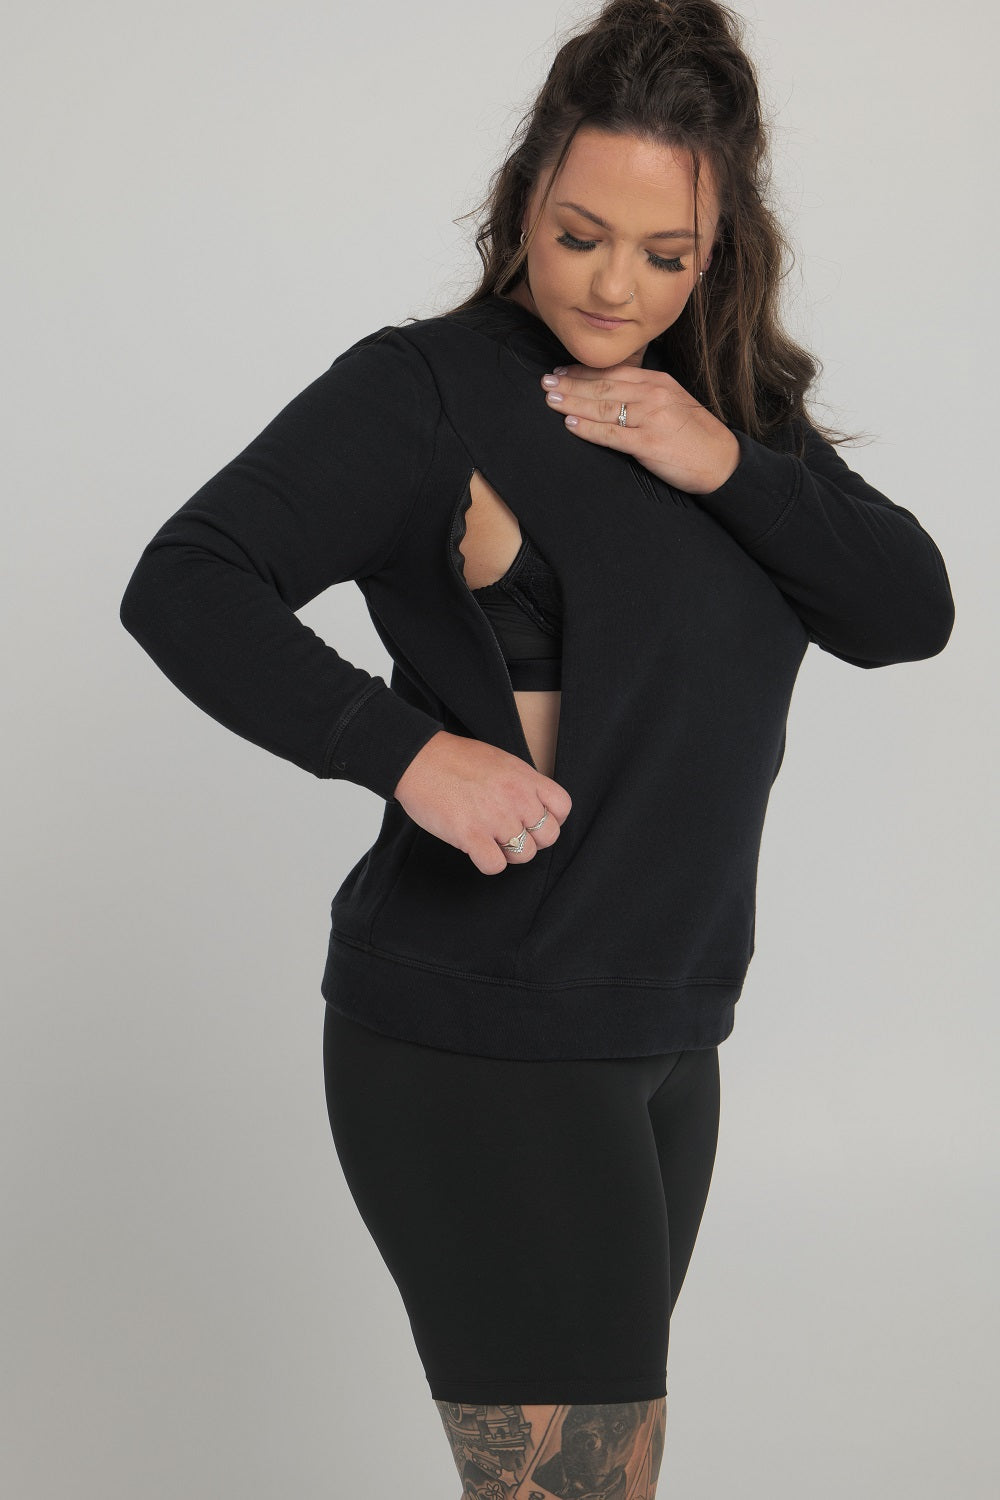 How to Breastfeed in our Blacked Out Breastfeeding Sweater